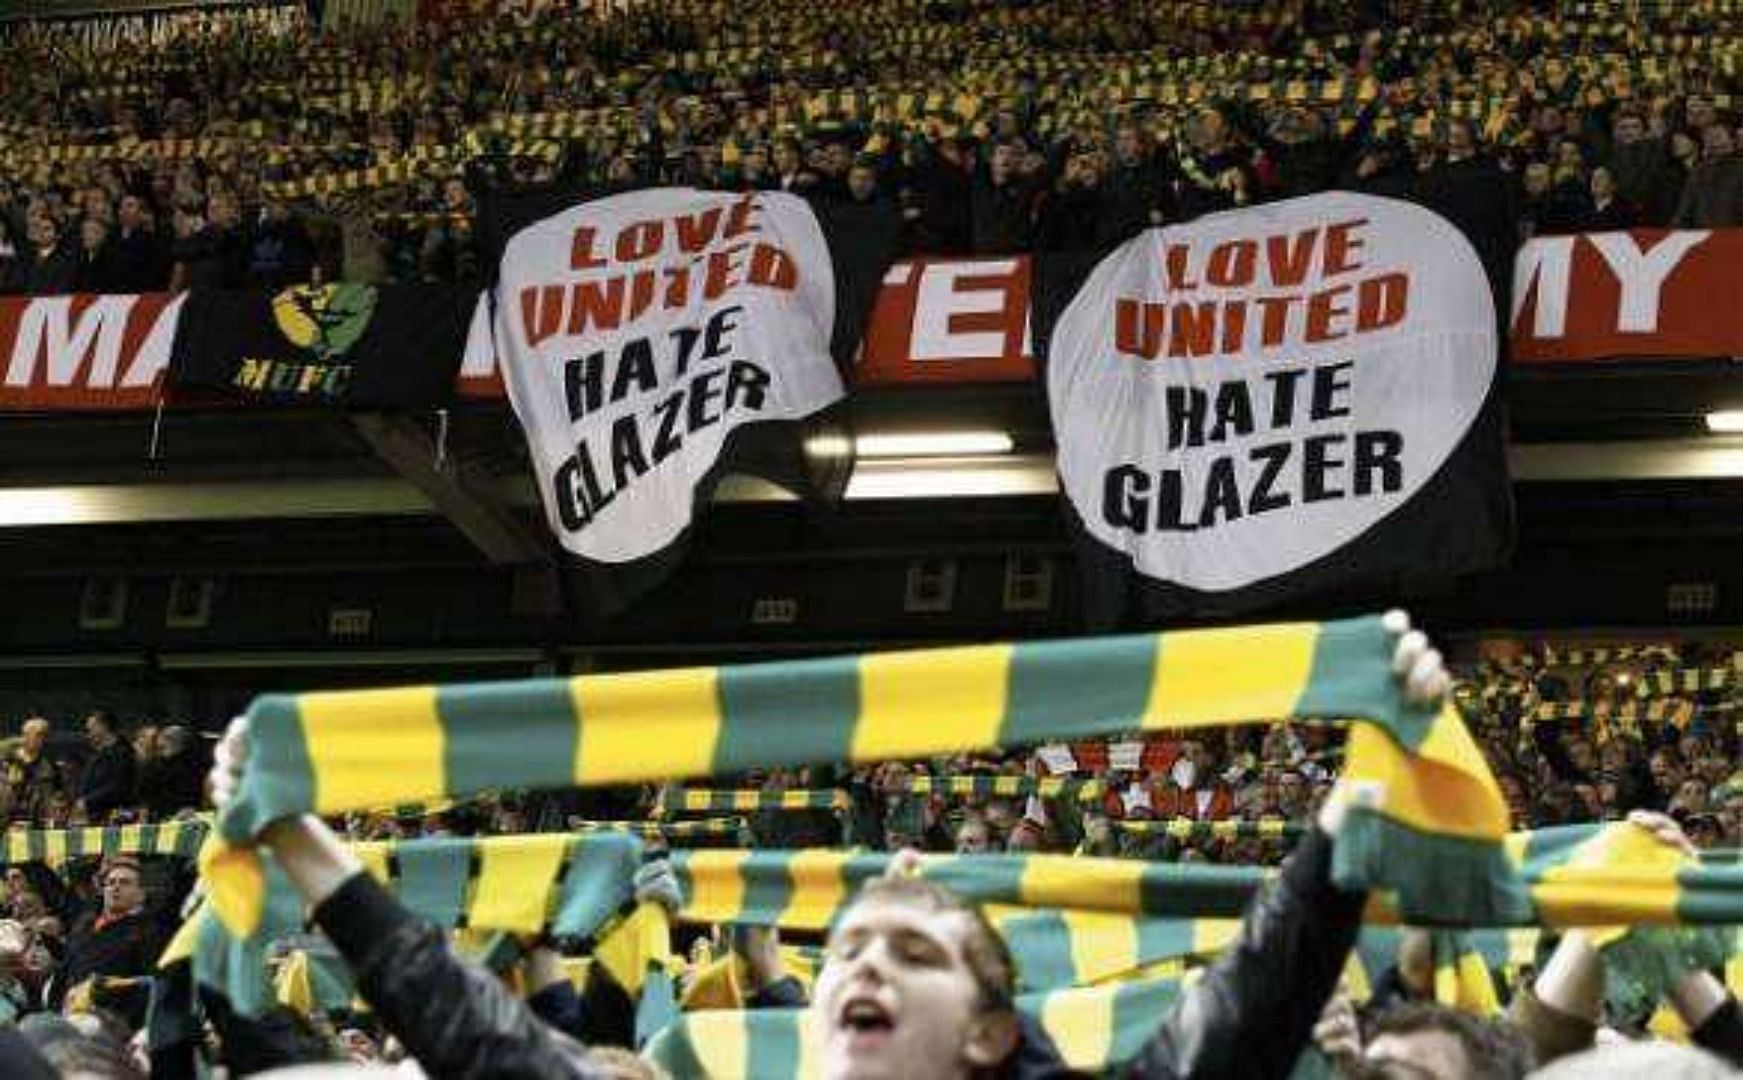 Manchester United fans were against the takeover of the club by the Glazer family.